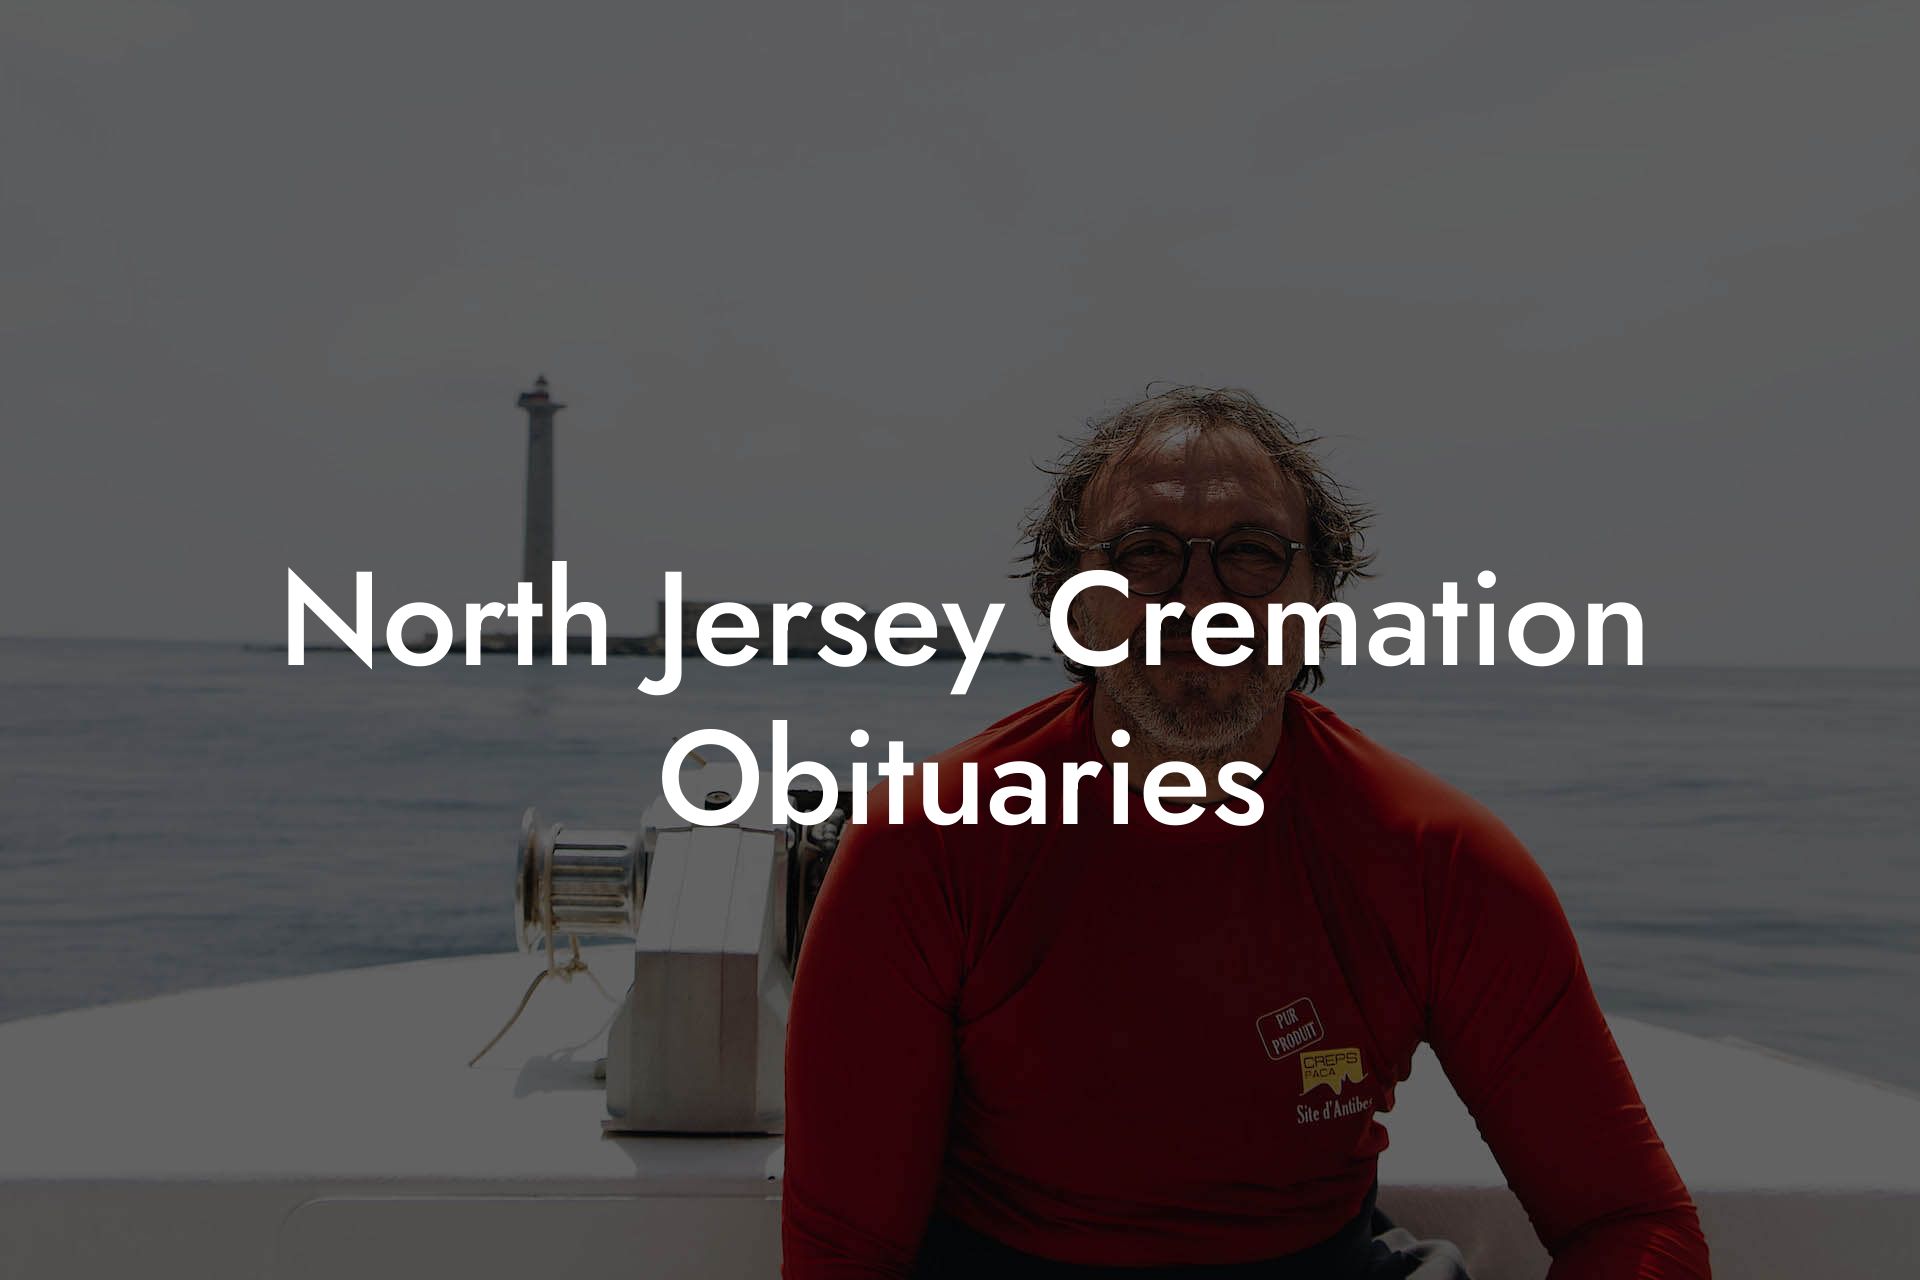 North Jersey Cremation Obituaries